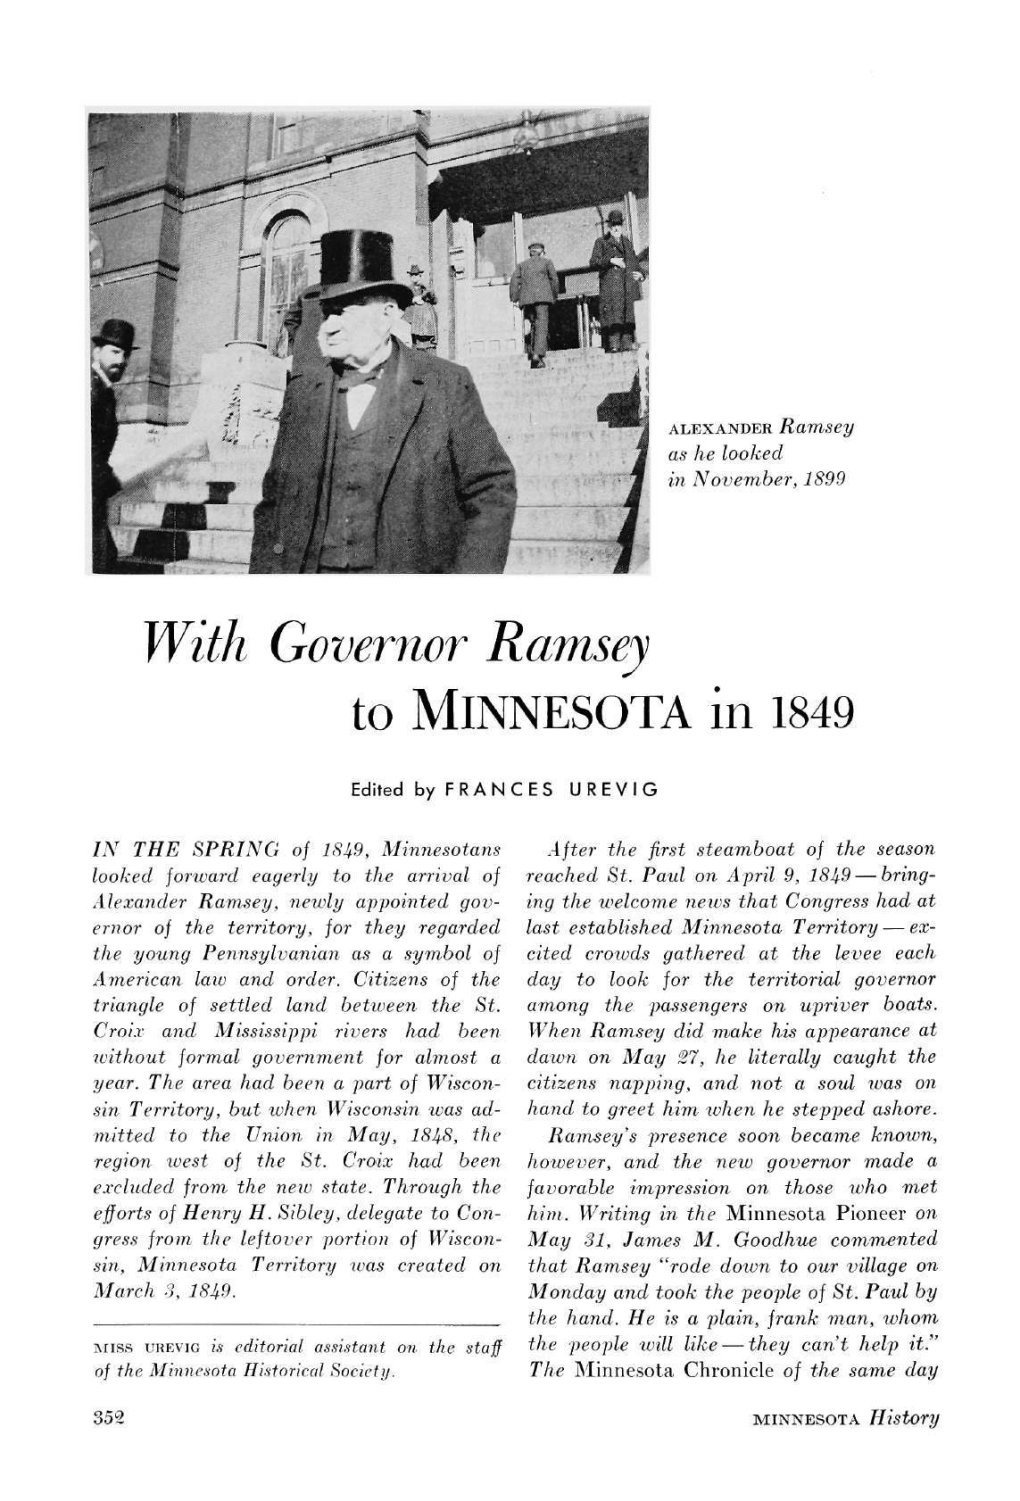 With Governor Ramsey to Minnesota in 1849, Ed. by Frances Urevig